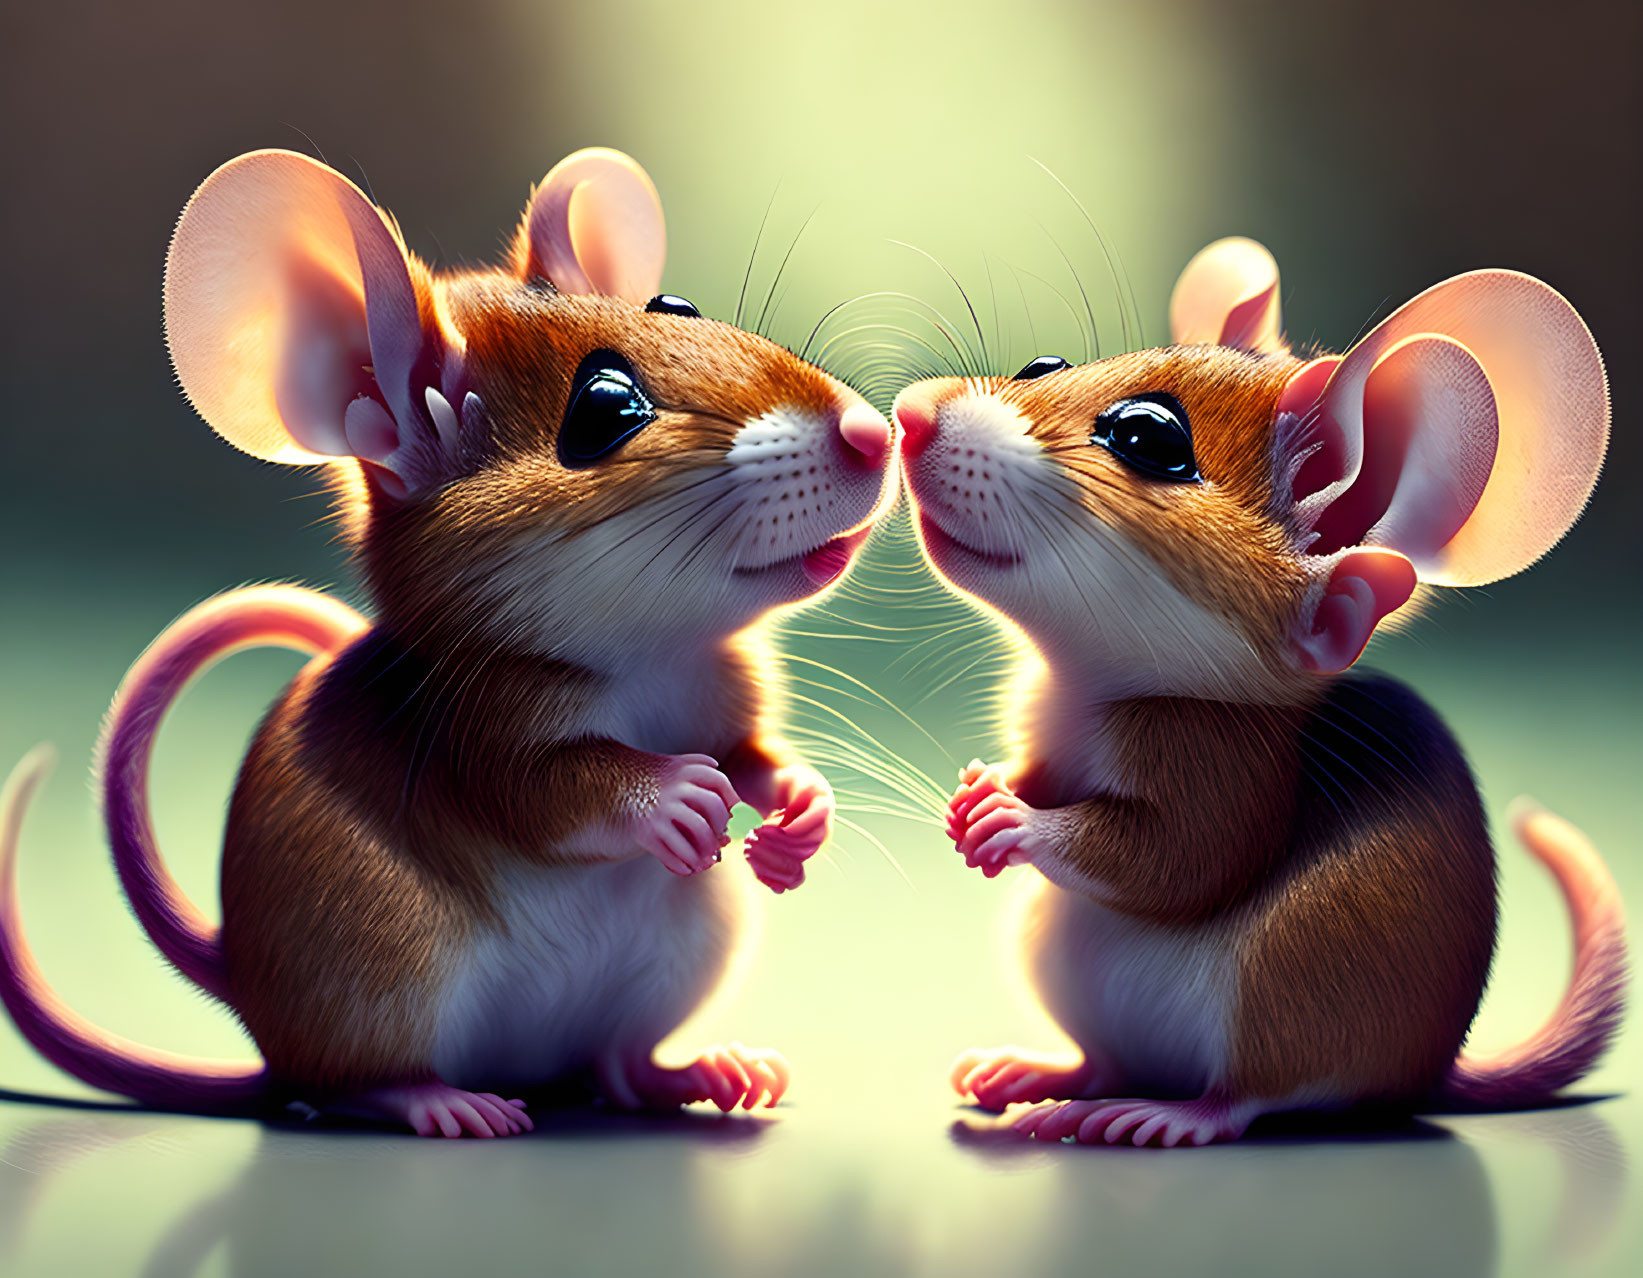 Two expressive animated mice communicating under soft backlighting